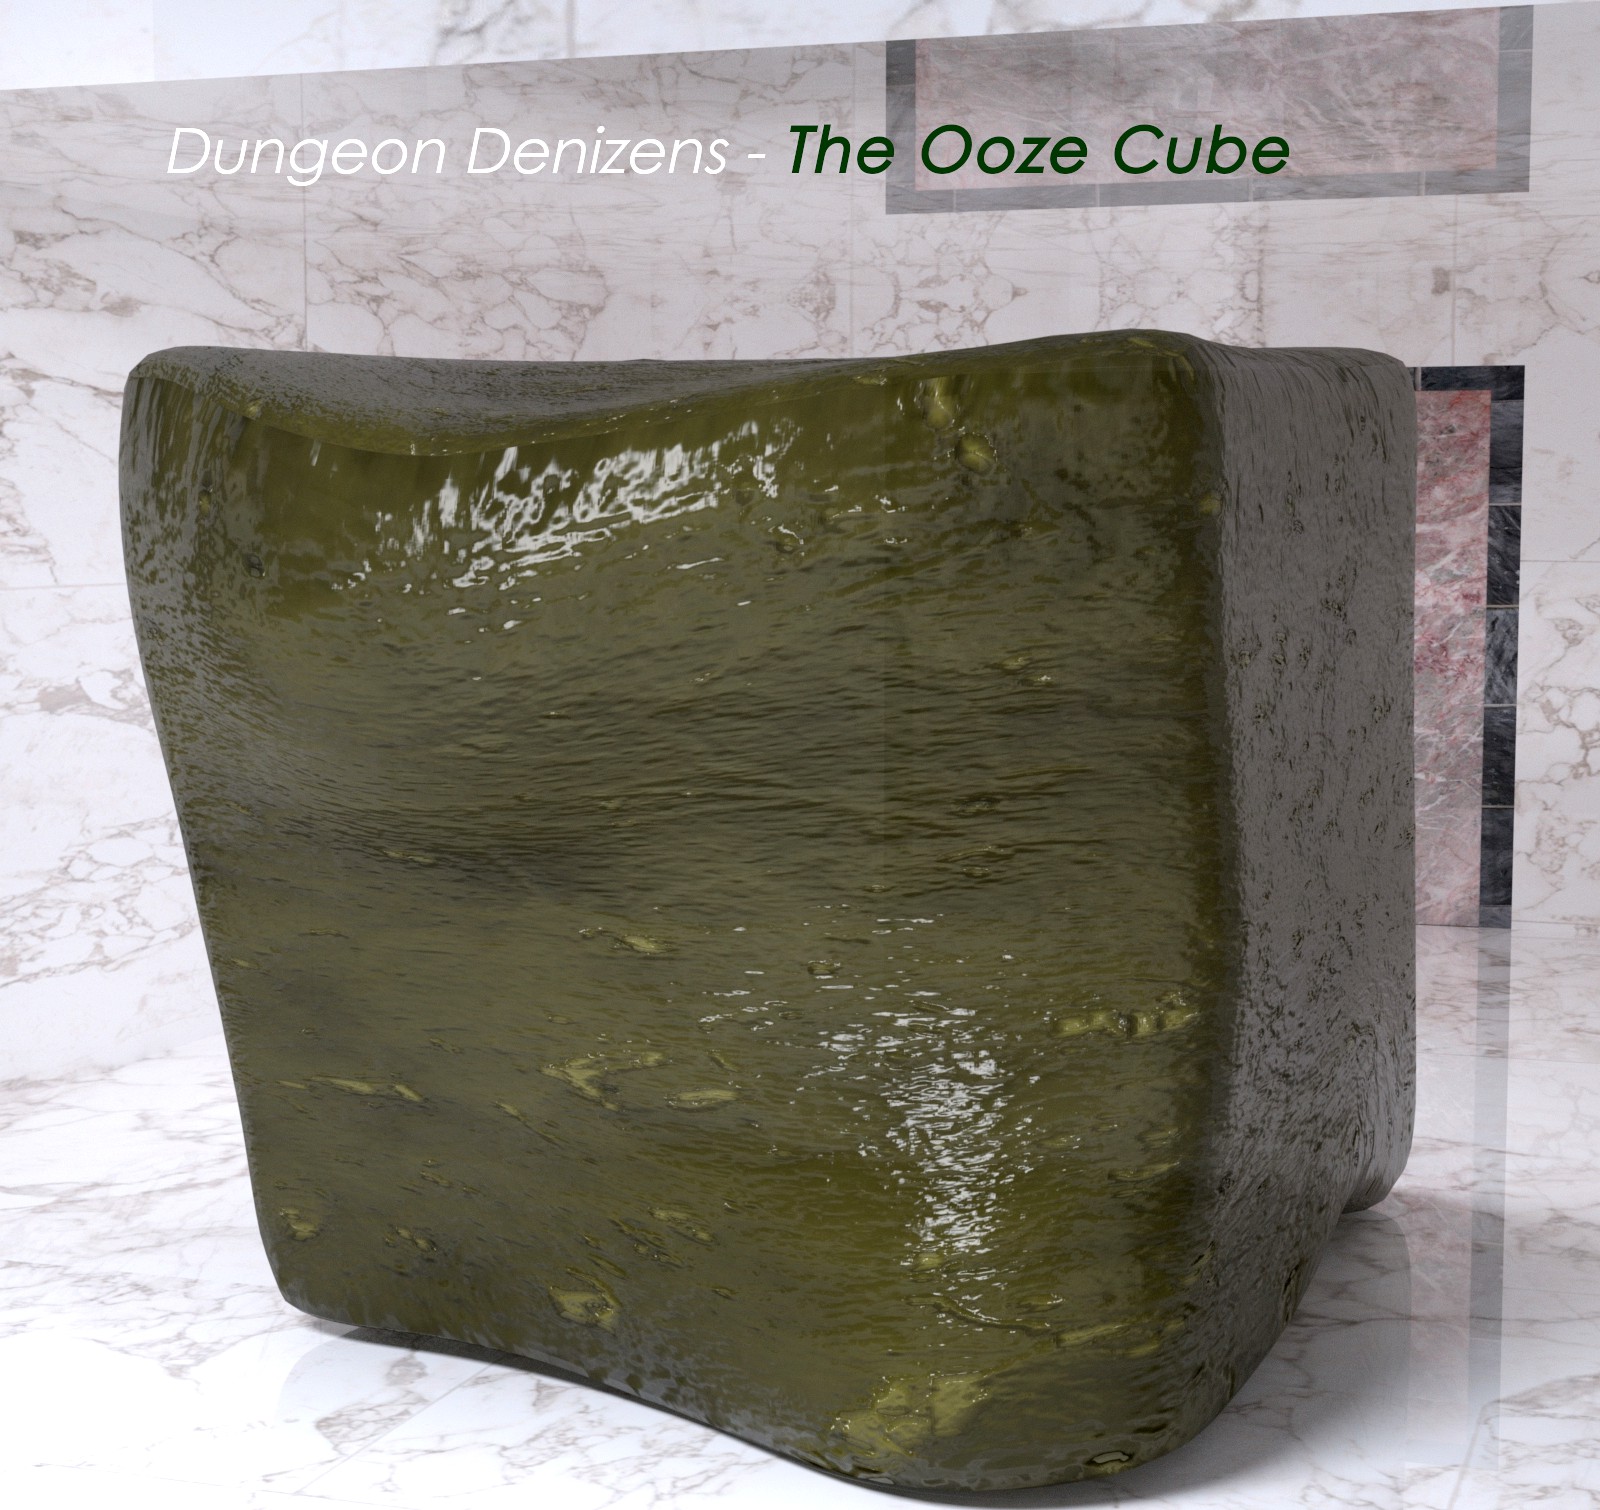 Dungeon Denizens - The Ooze Cube